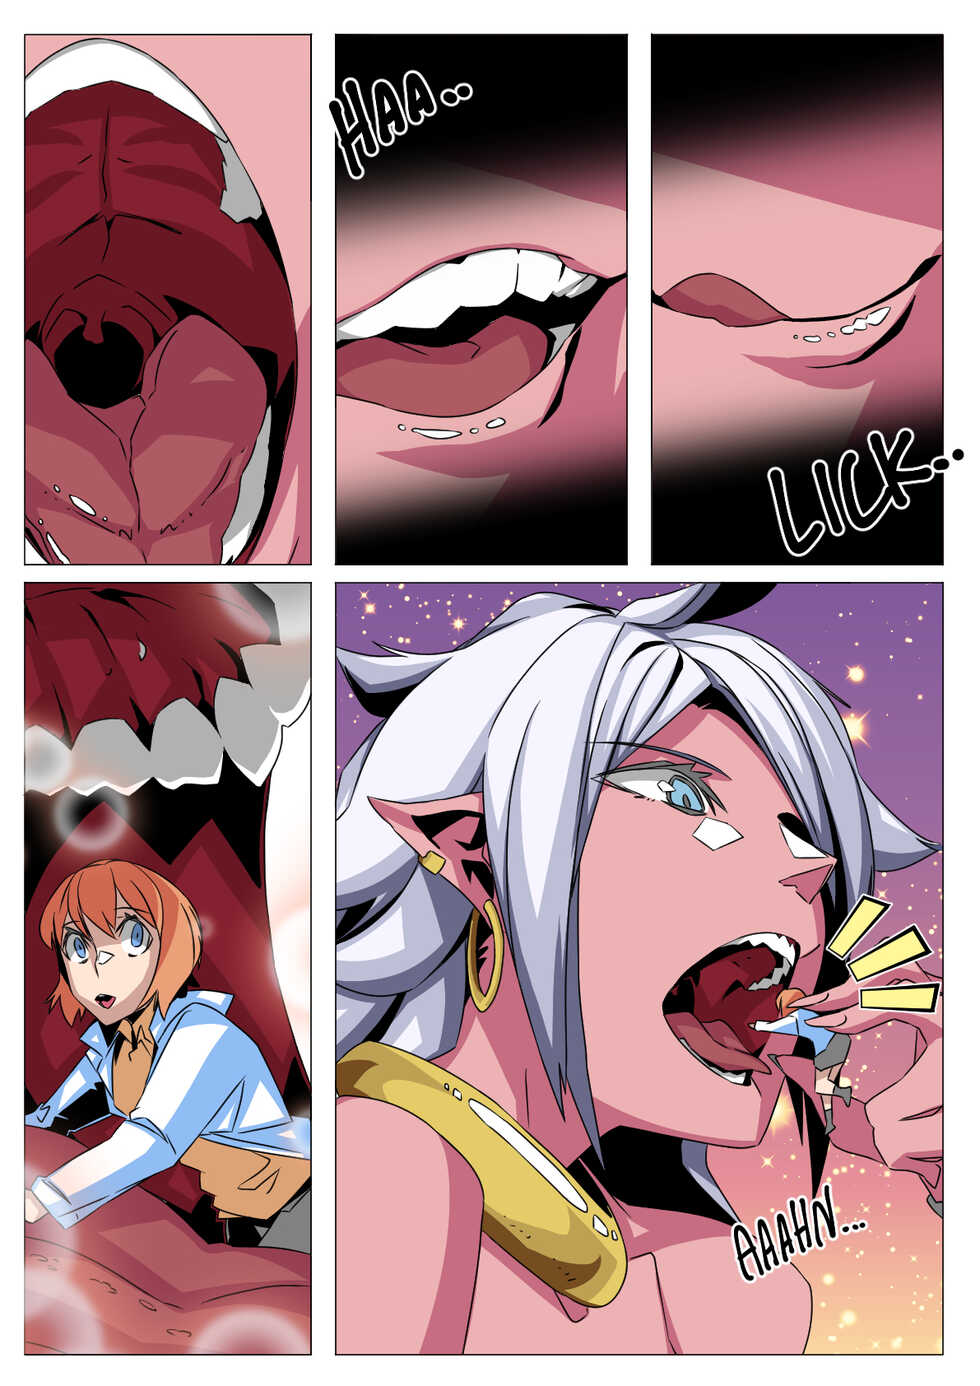 [LuckyB] Android 21 vore - Page 2